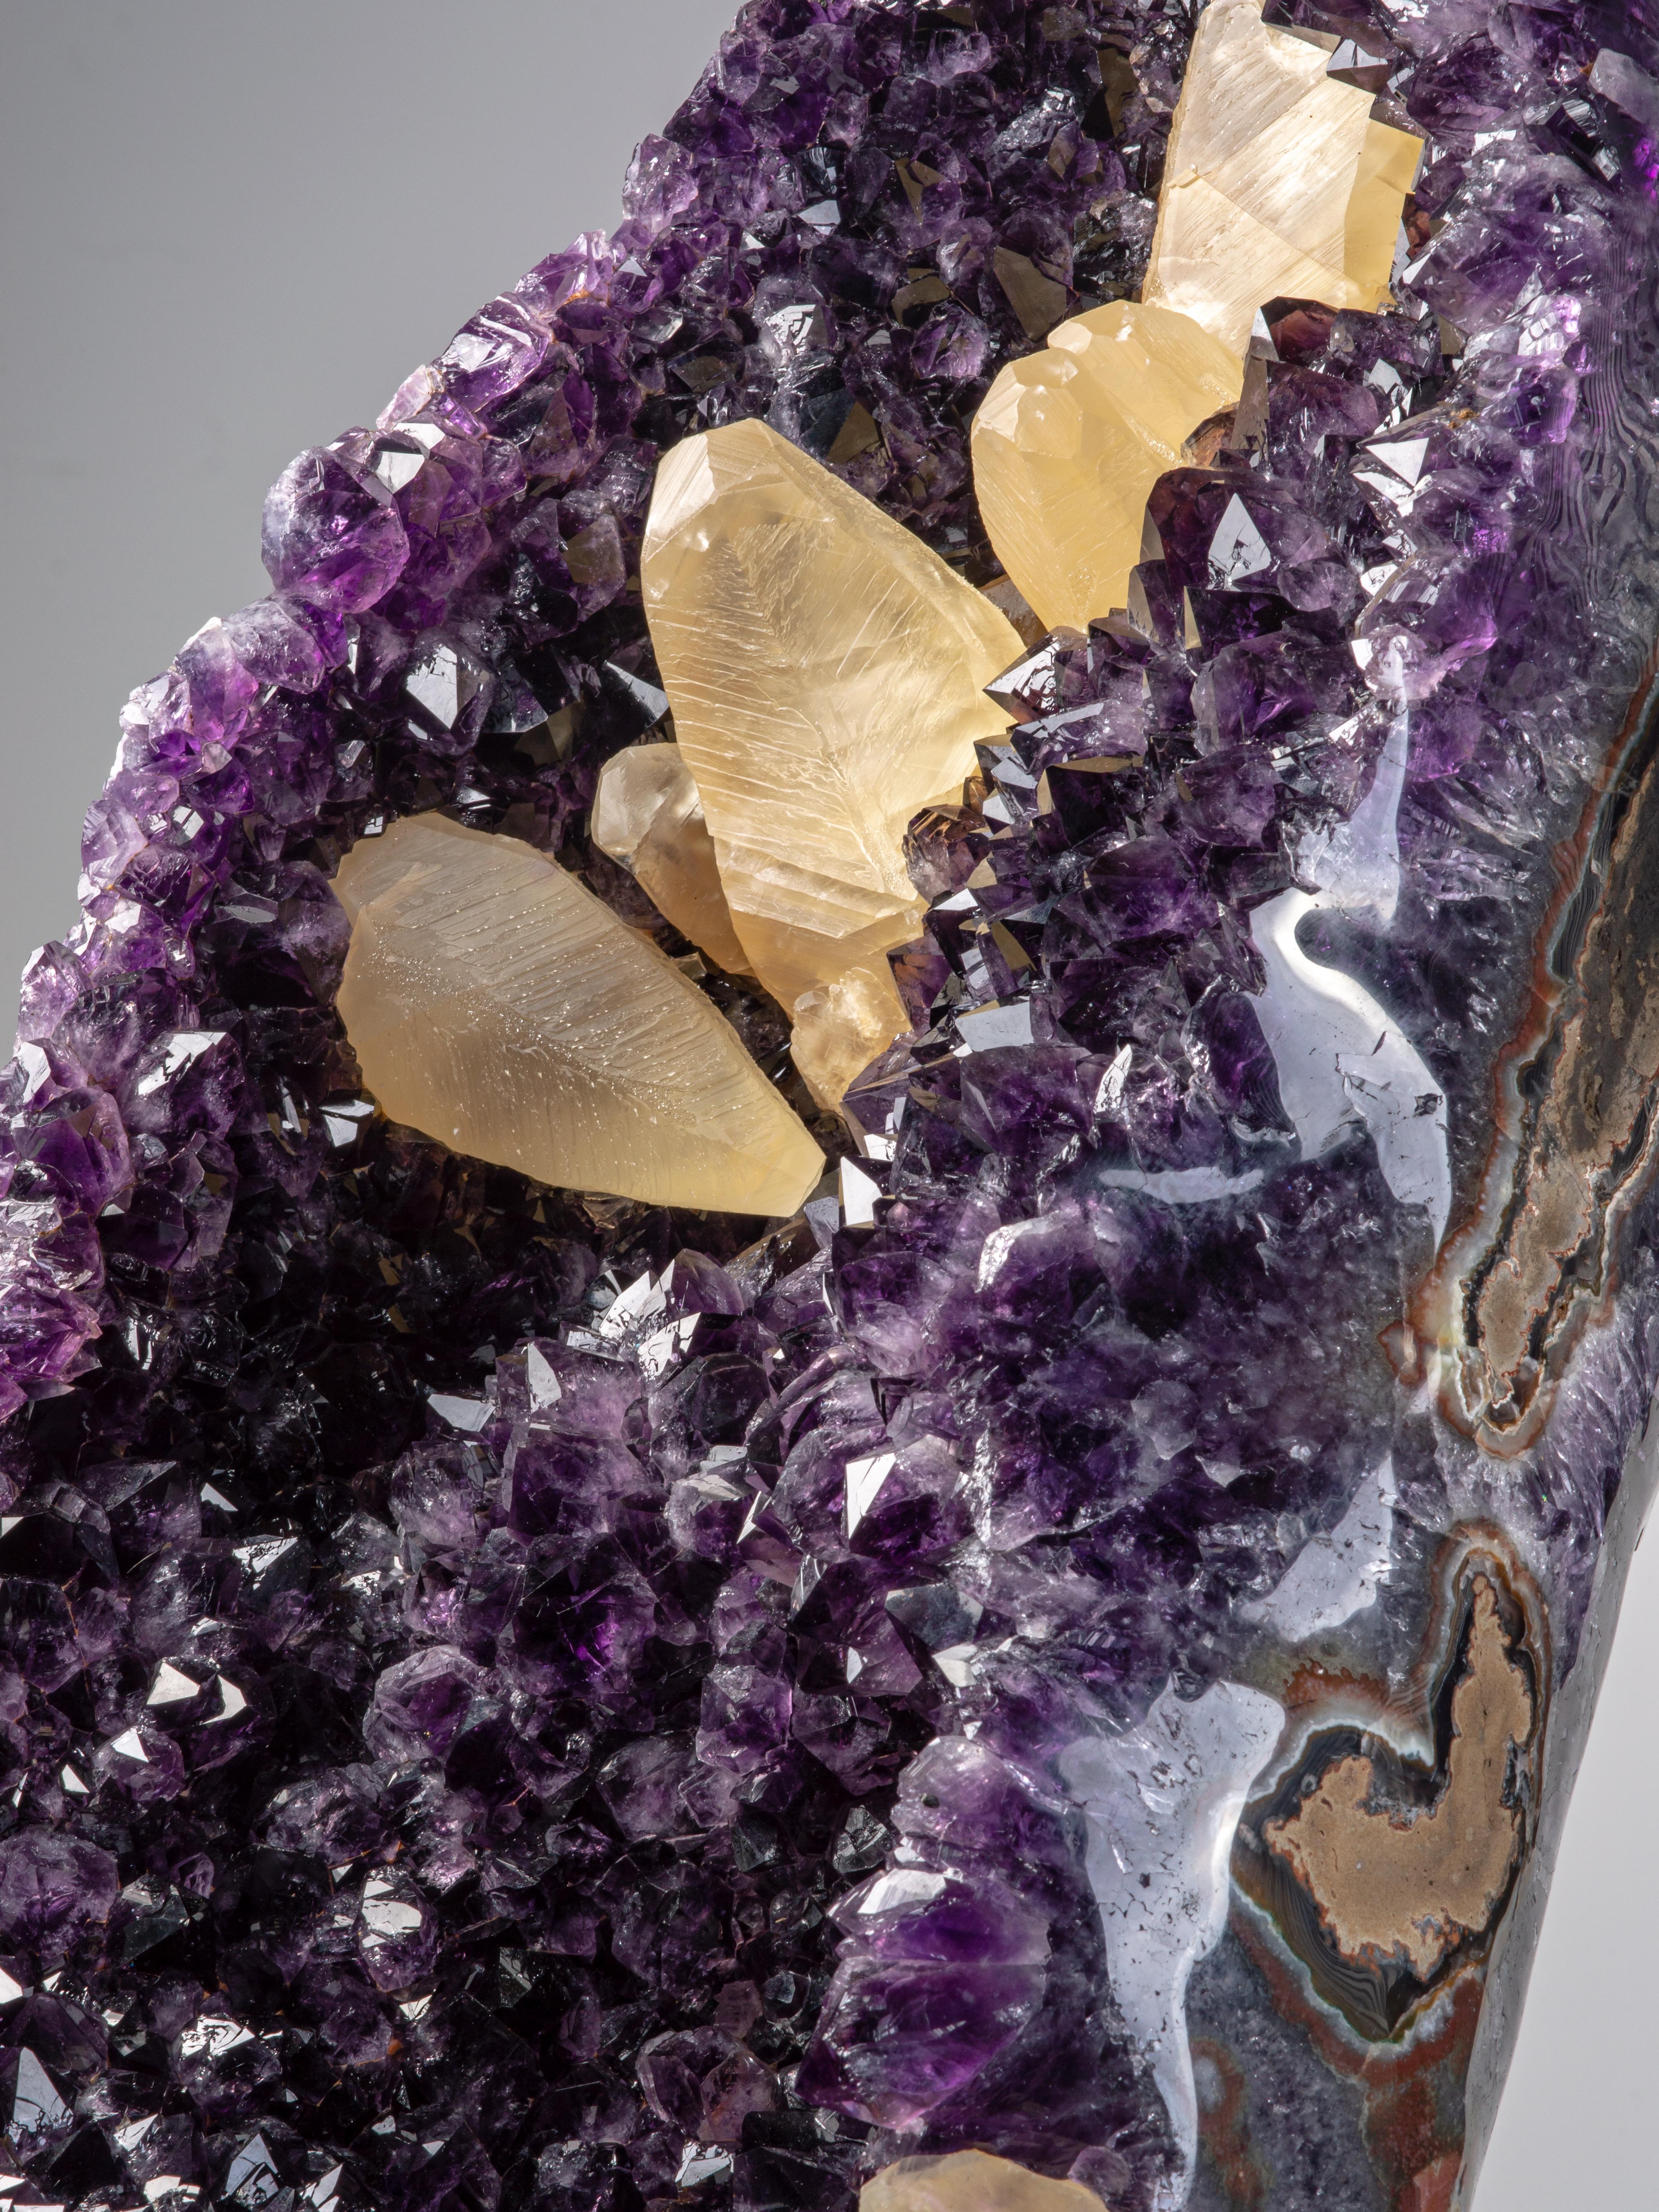 Substantial V-Shaped Amethyst Formation with Calcites 5